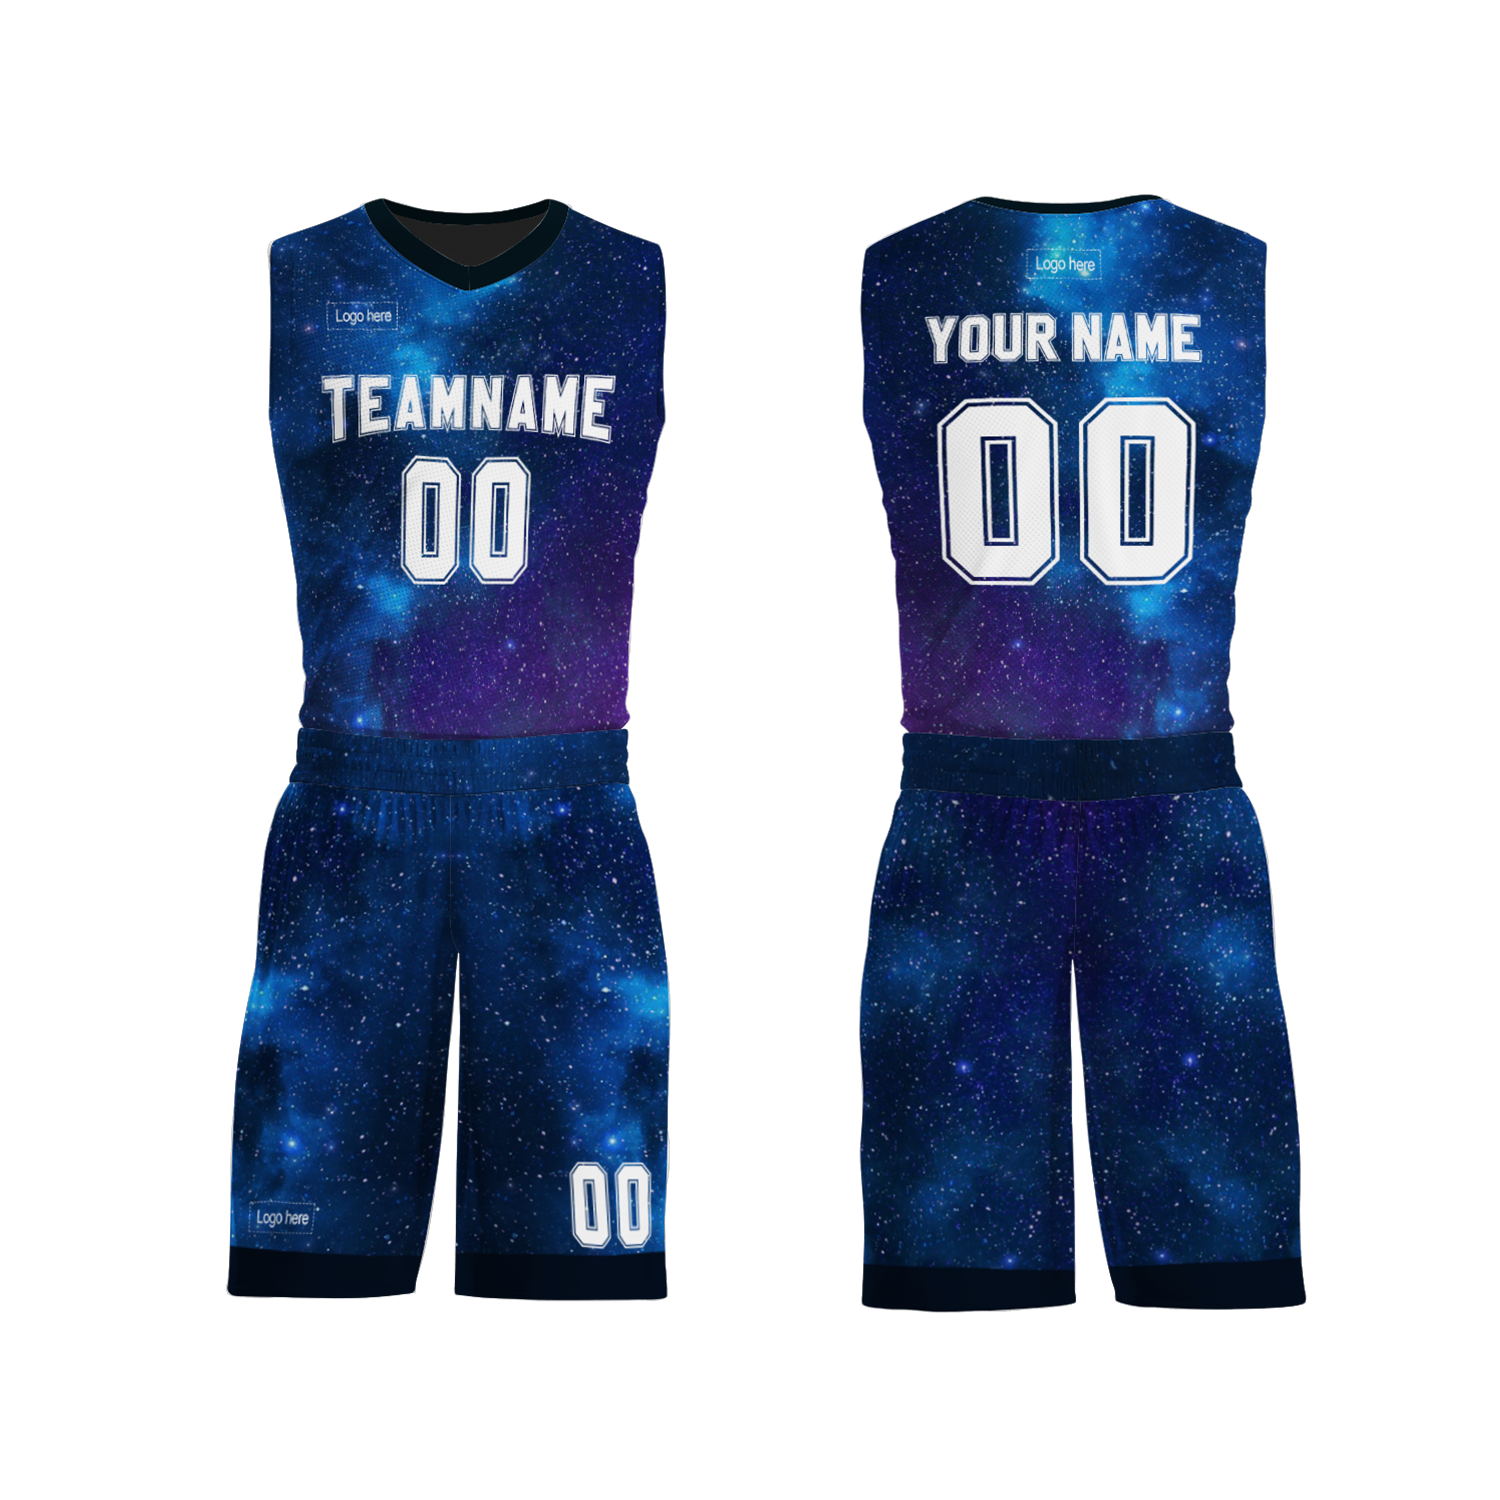 Newest Sports Basketball Jersey Uniforms Design Sublimation Customize Print on Demand Basketball Suits